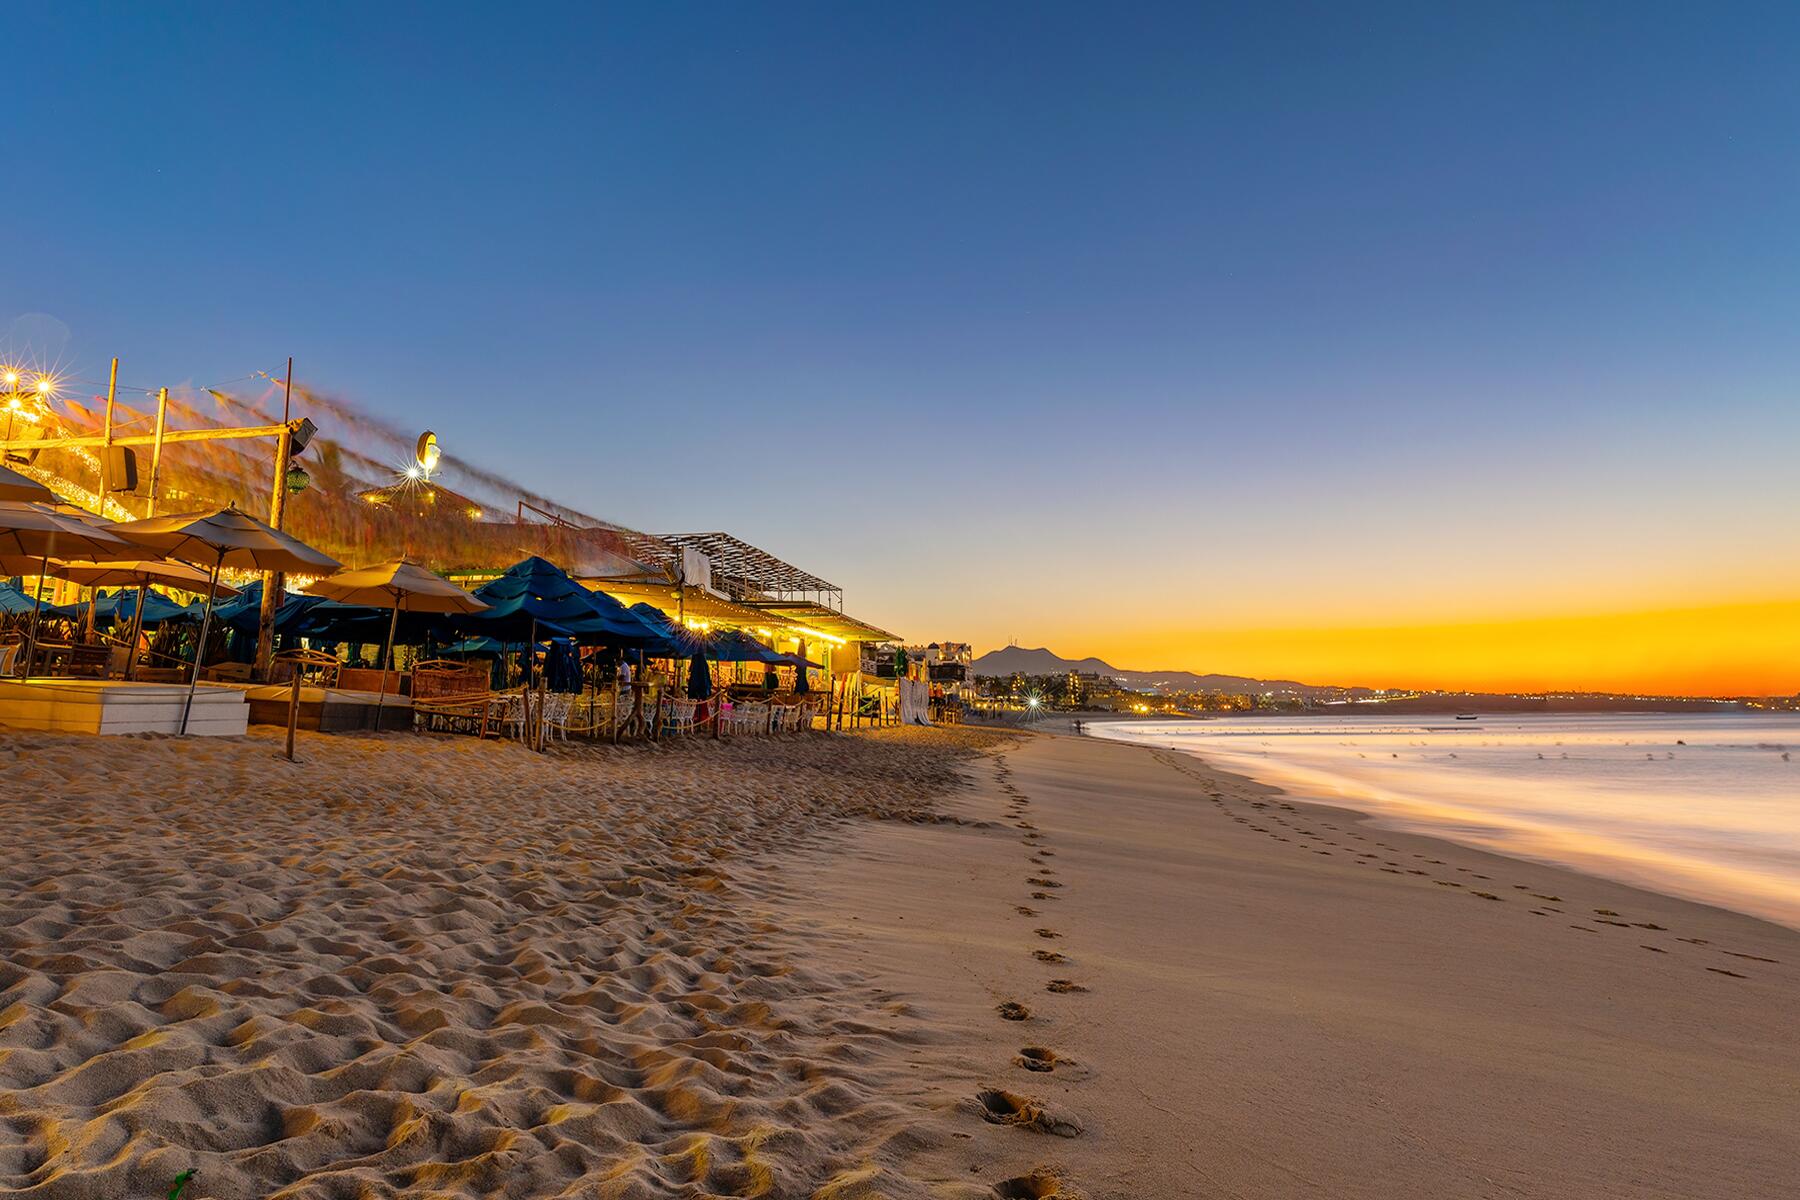 <a href='https://www.fodors.com/world/mexico-and-central-america/mexico/los-cabos/experiences/news/photos/best-outdoor-activities-and-things-to-do-in-los-cabos#'>From &quot;The 10 Best Outdoor Activities in Los Cabos: Dining With Your Feet in the Sand&quot;</a>